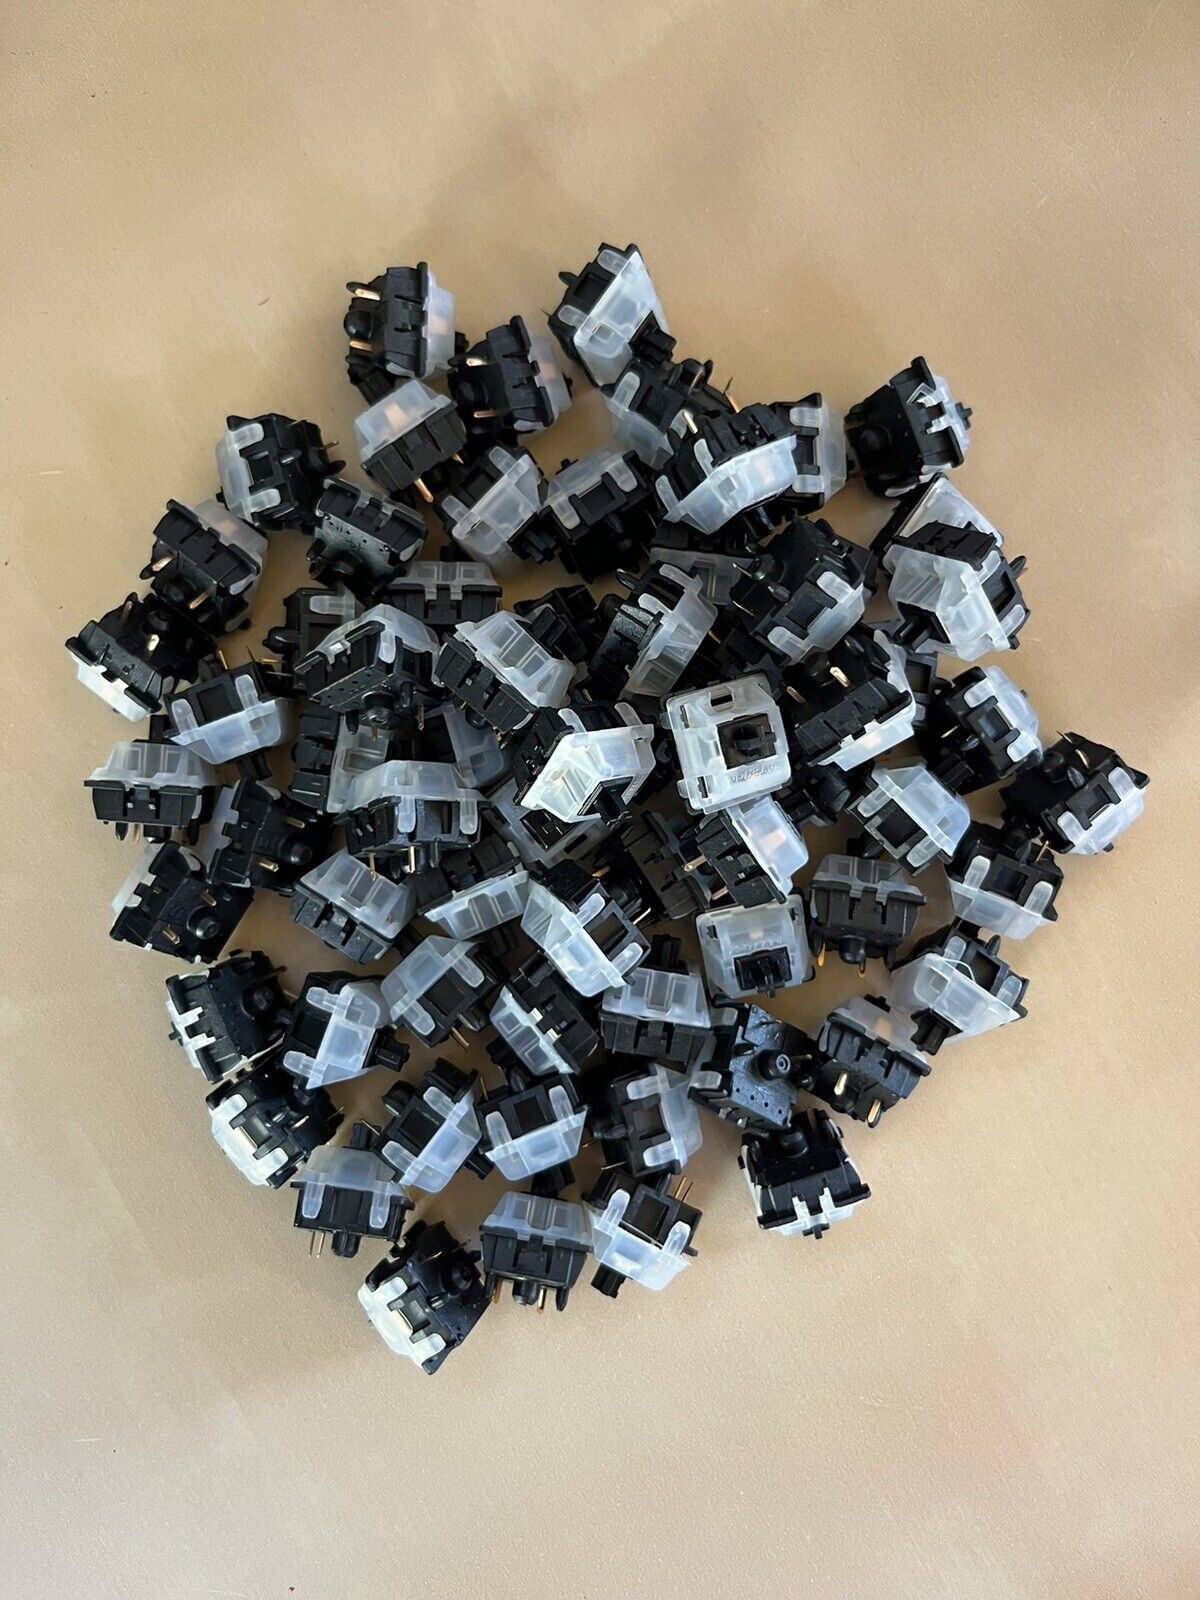 70x Gateron Milky Black Hand Lubed And Filmed Switches